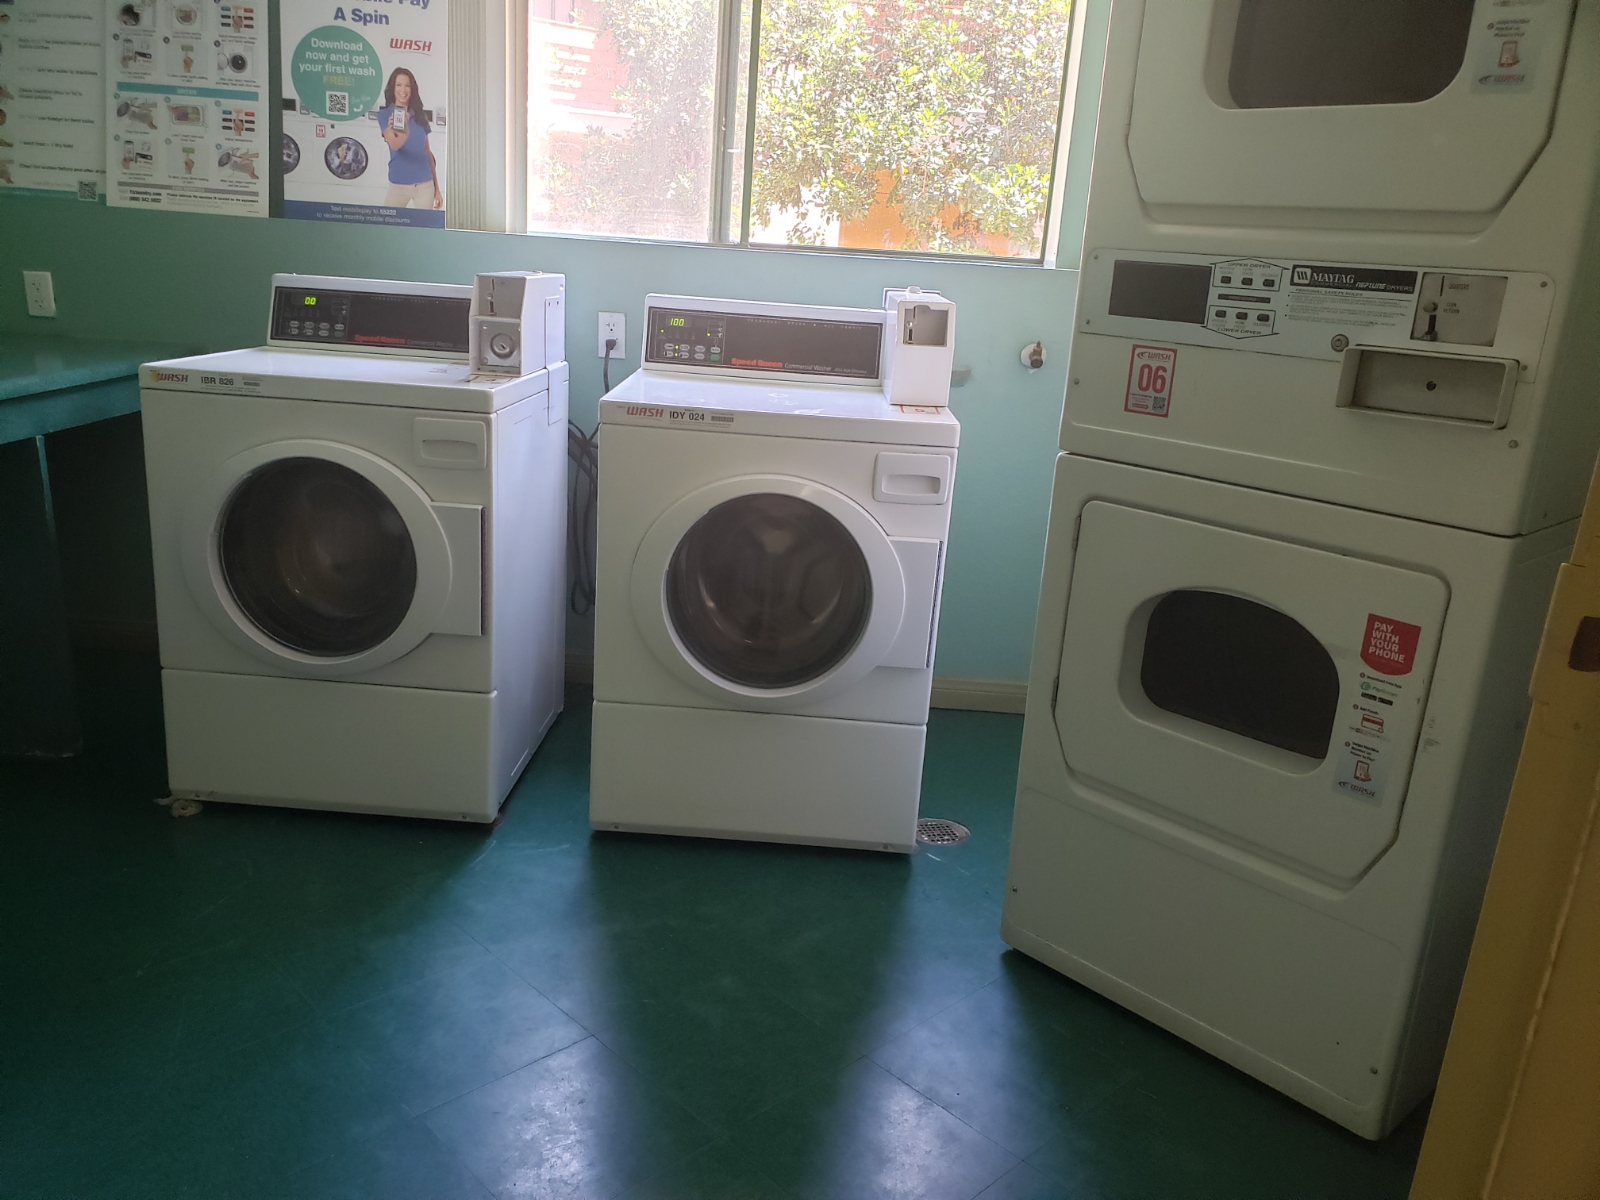 Laundry Room has 2 washer and 2 dryers.